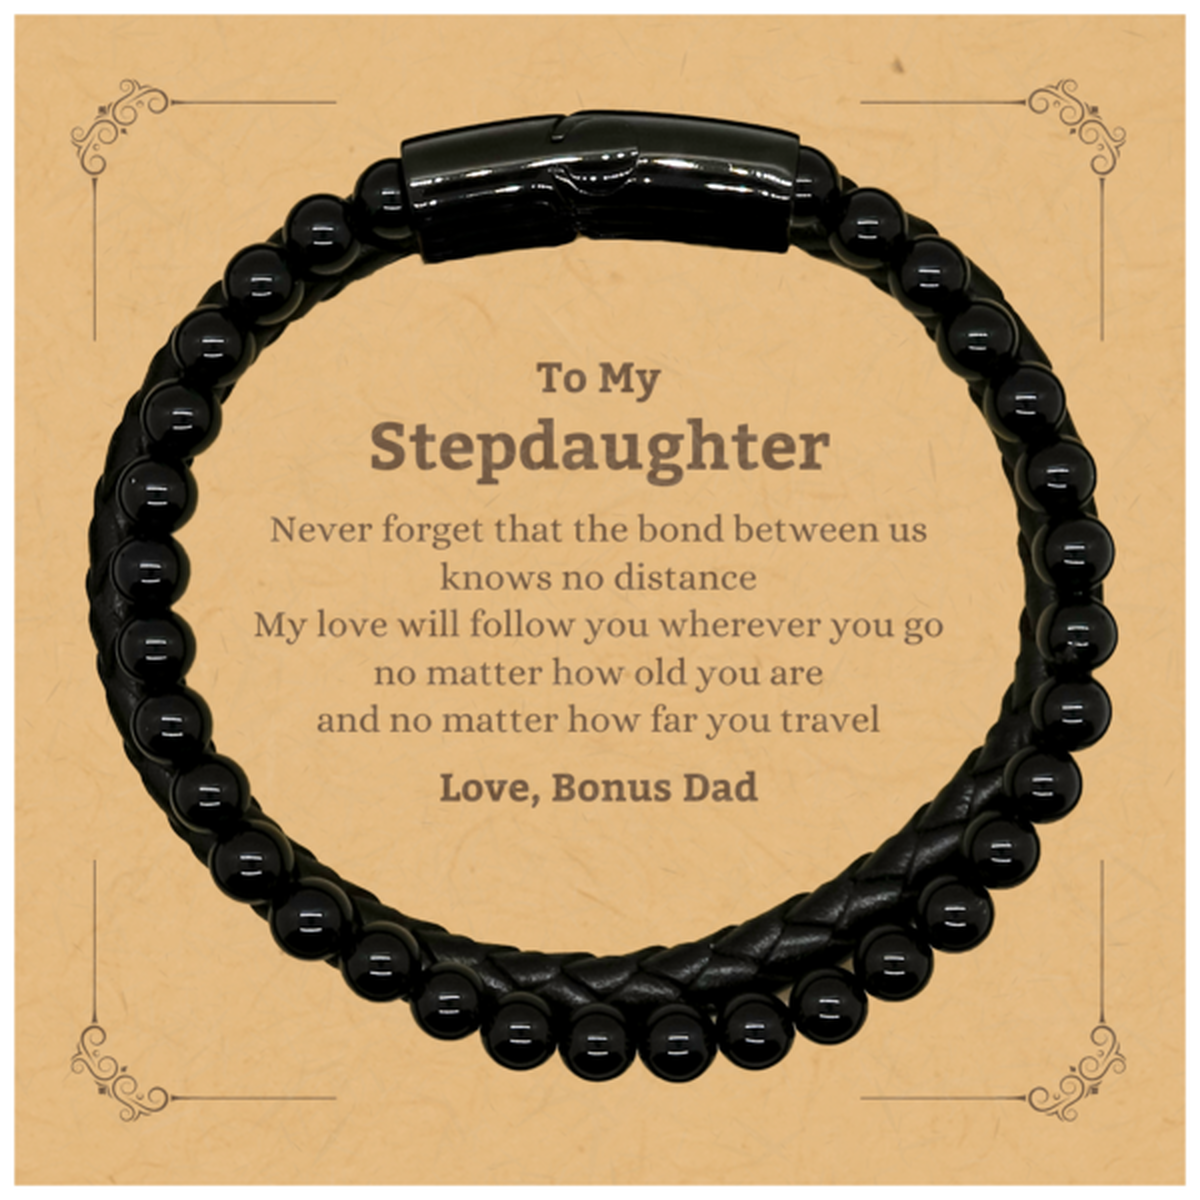 Stepdaughter Birthday Gifts from Bonus Dad, Adjustable Stone Leather Bracelets for Stepdaughter Christmas Graduation Unique Gifts Stepdaughter Never forget that the bond between us knows no distance. Love, Bonus Dad